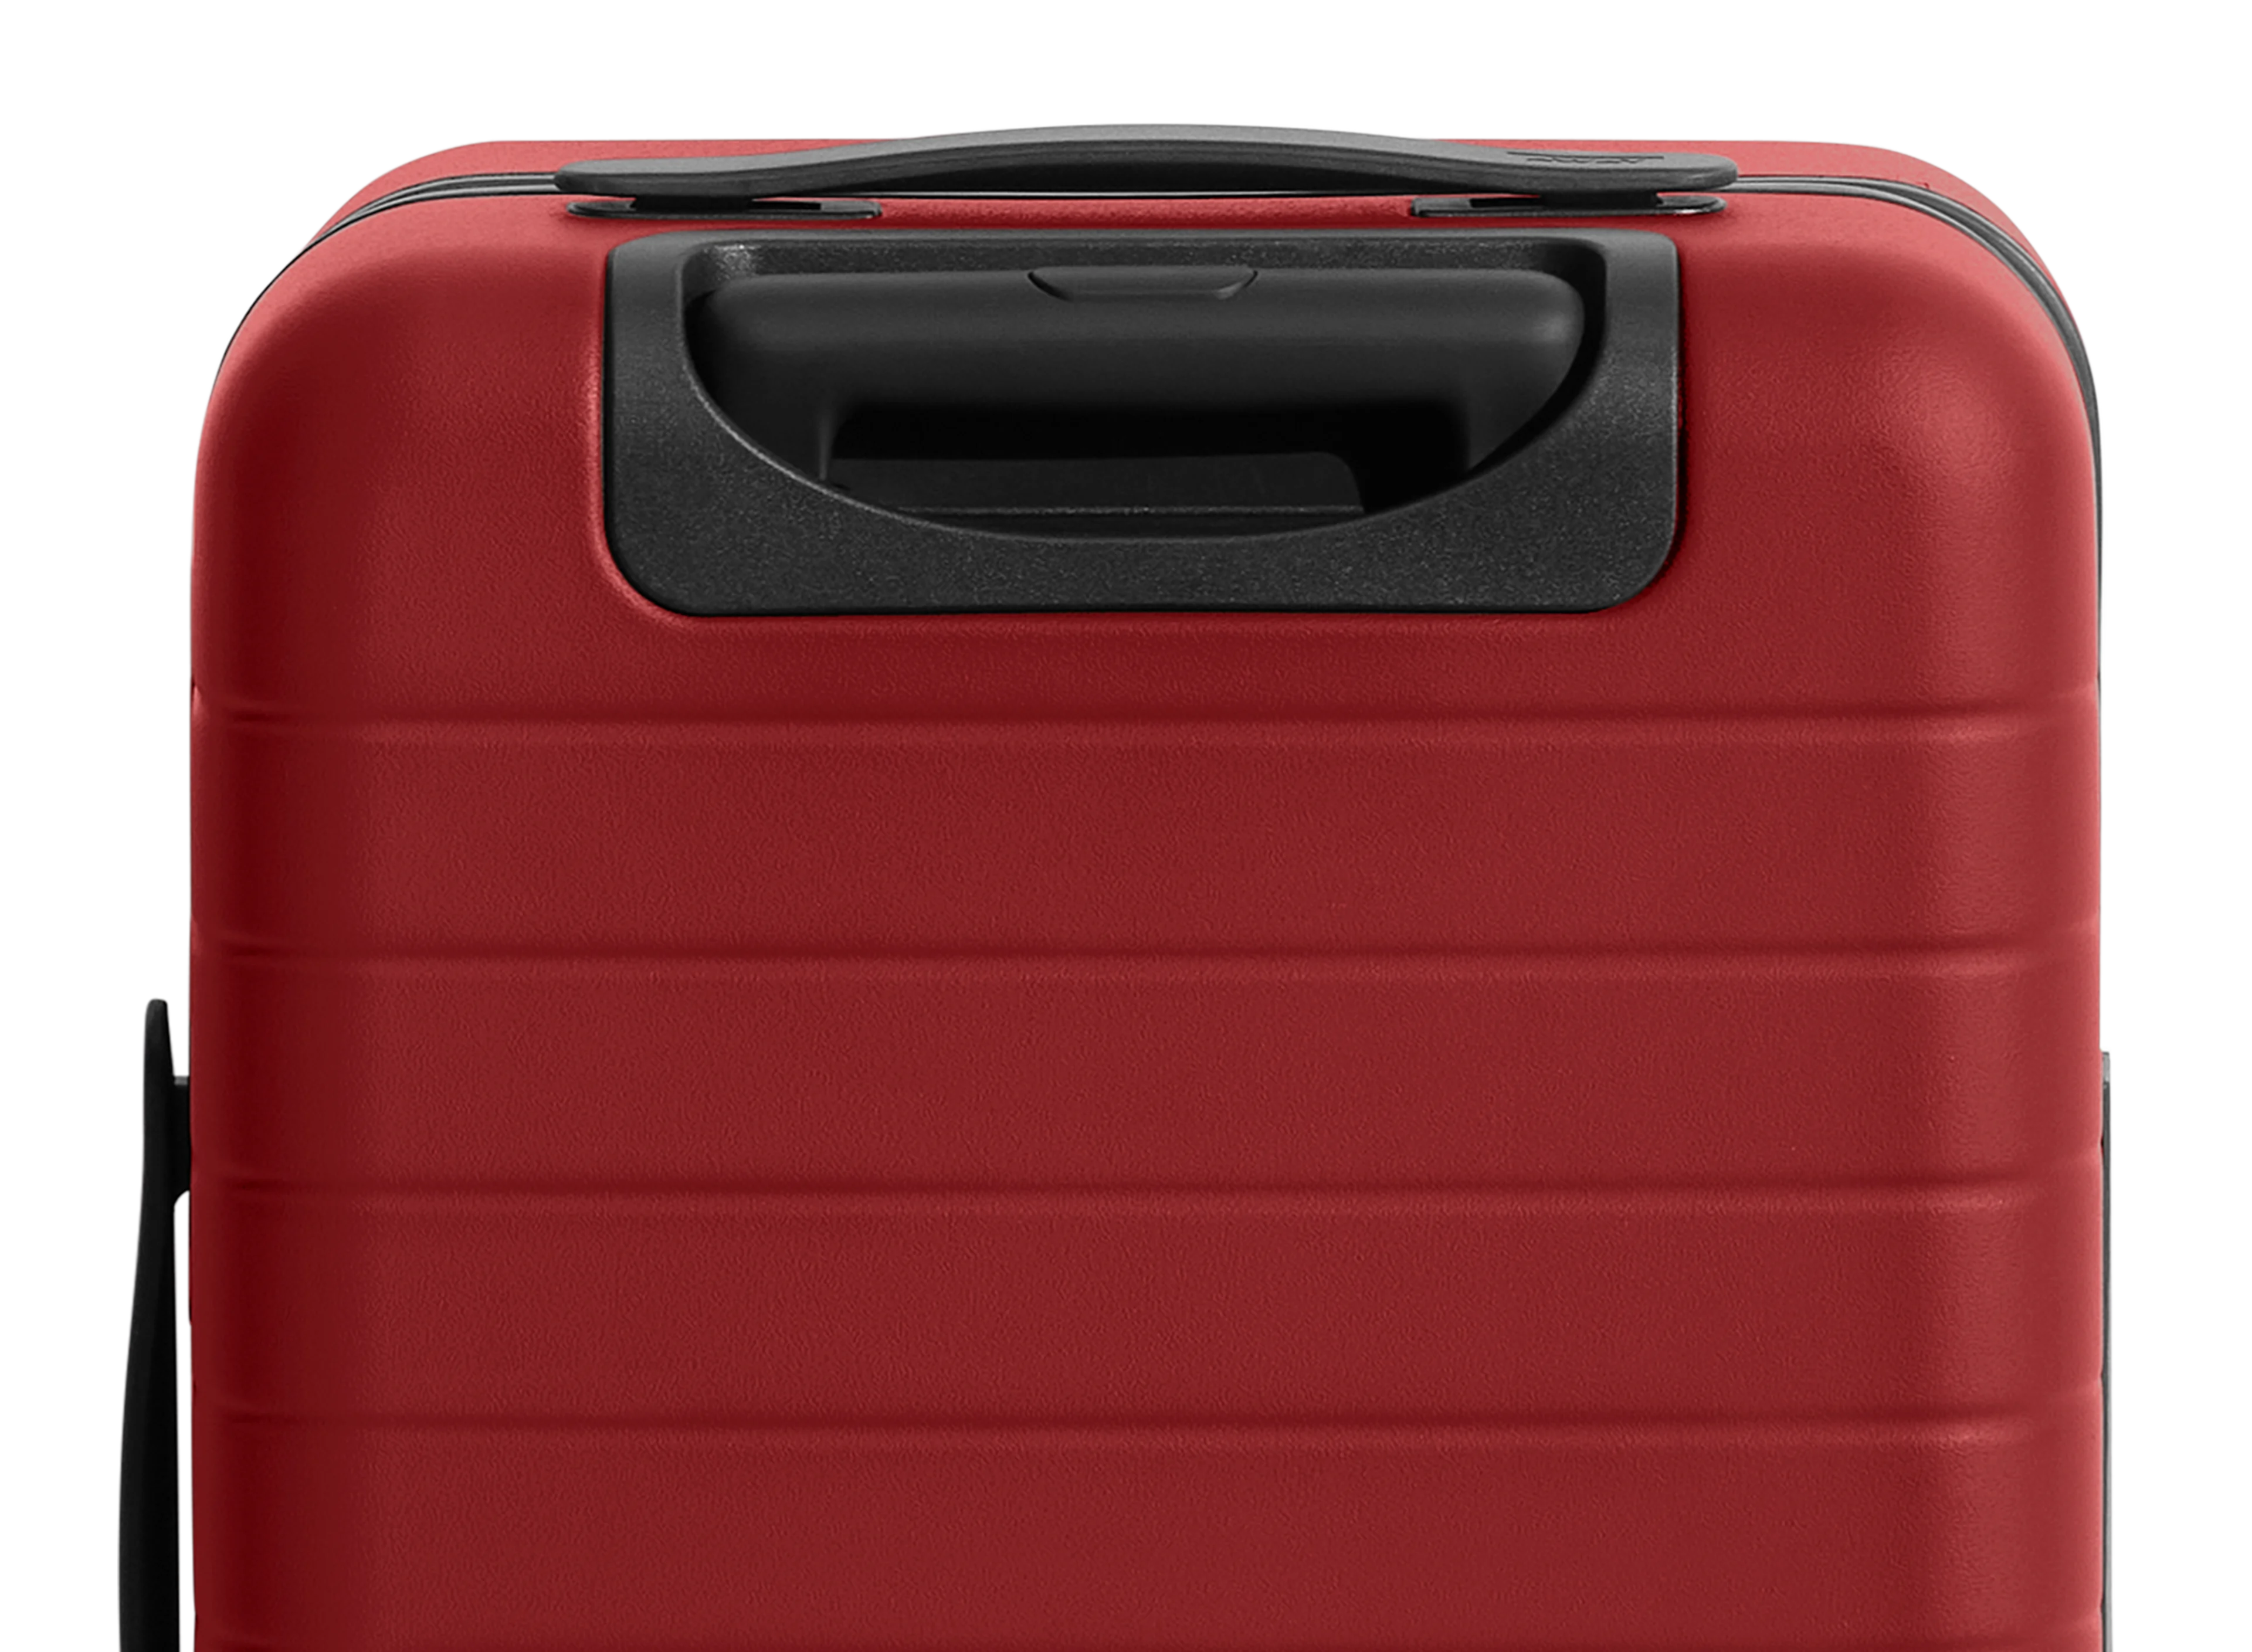 The Carry-On Flex in Tango Red